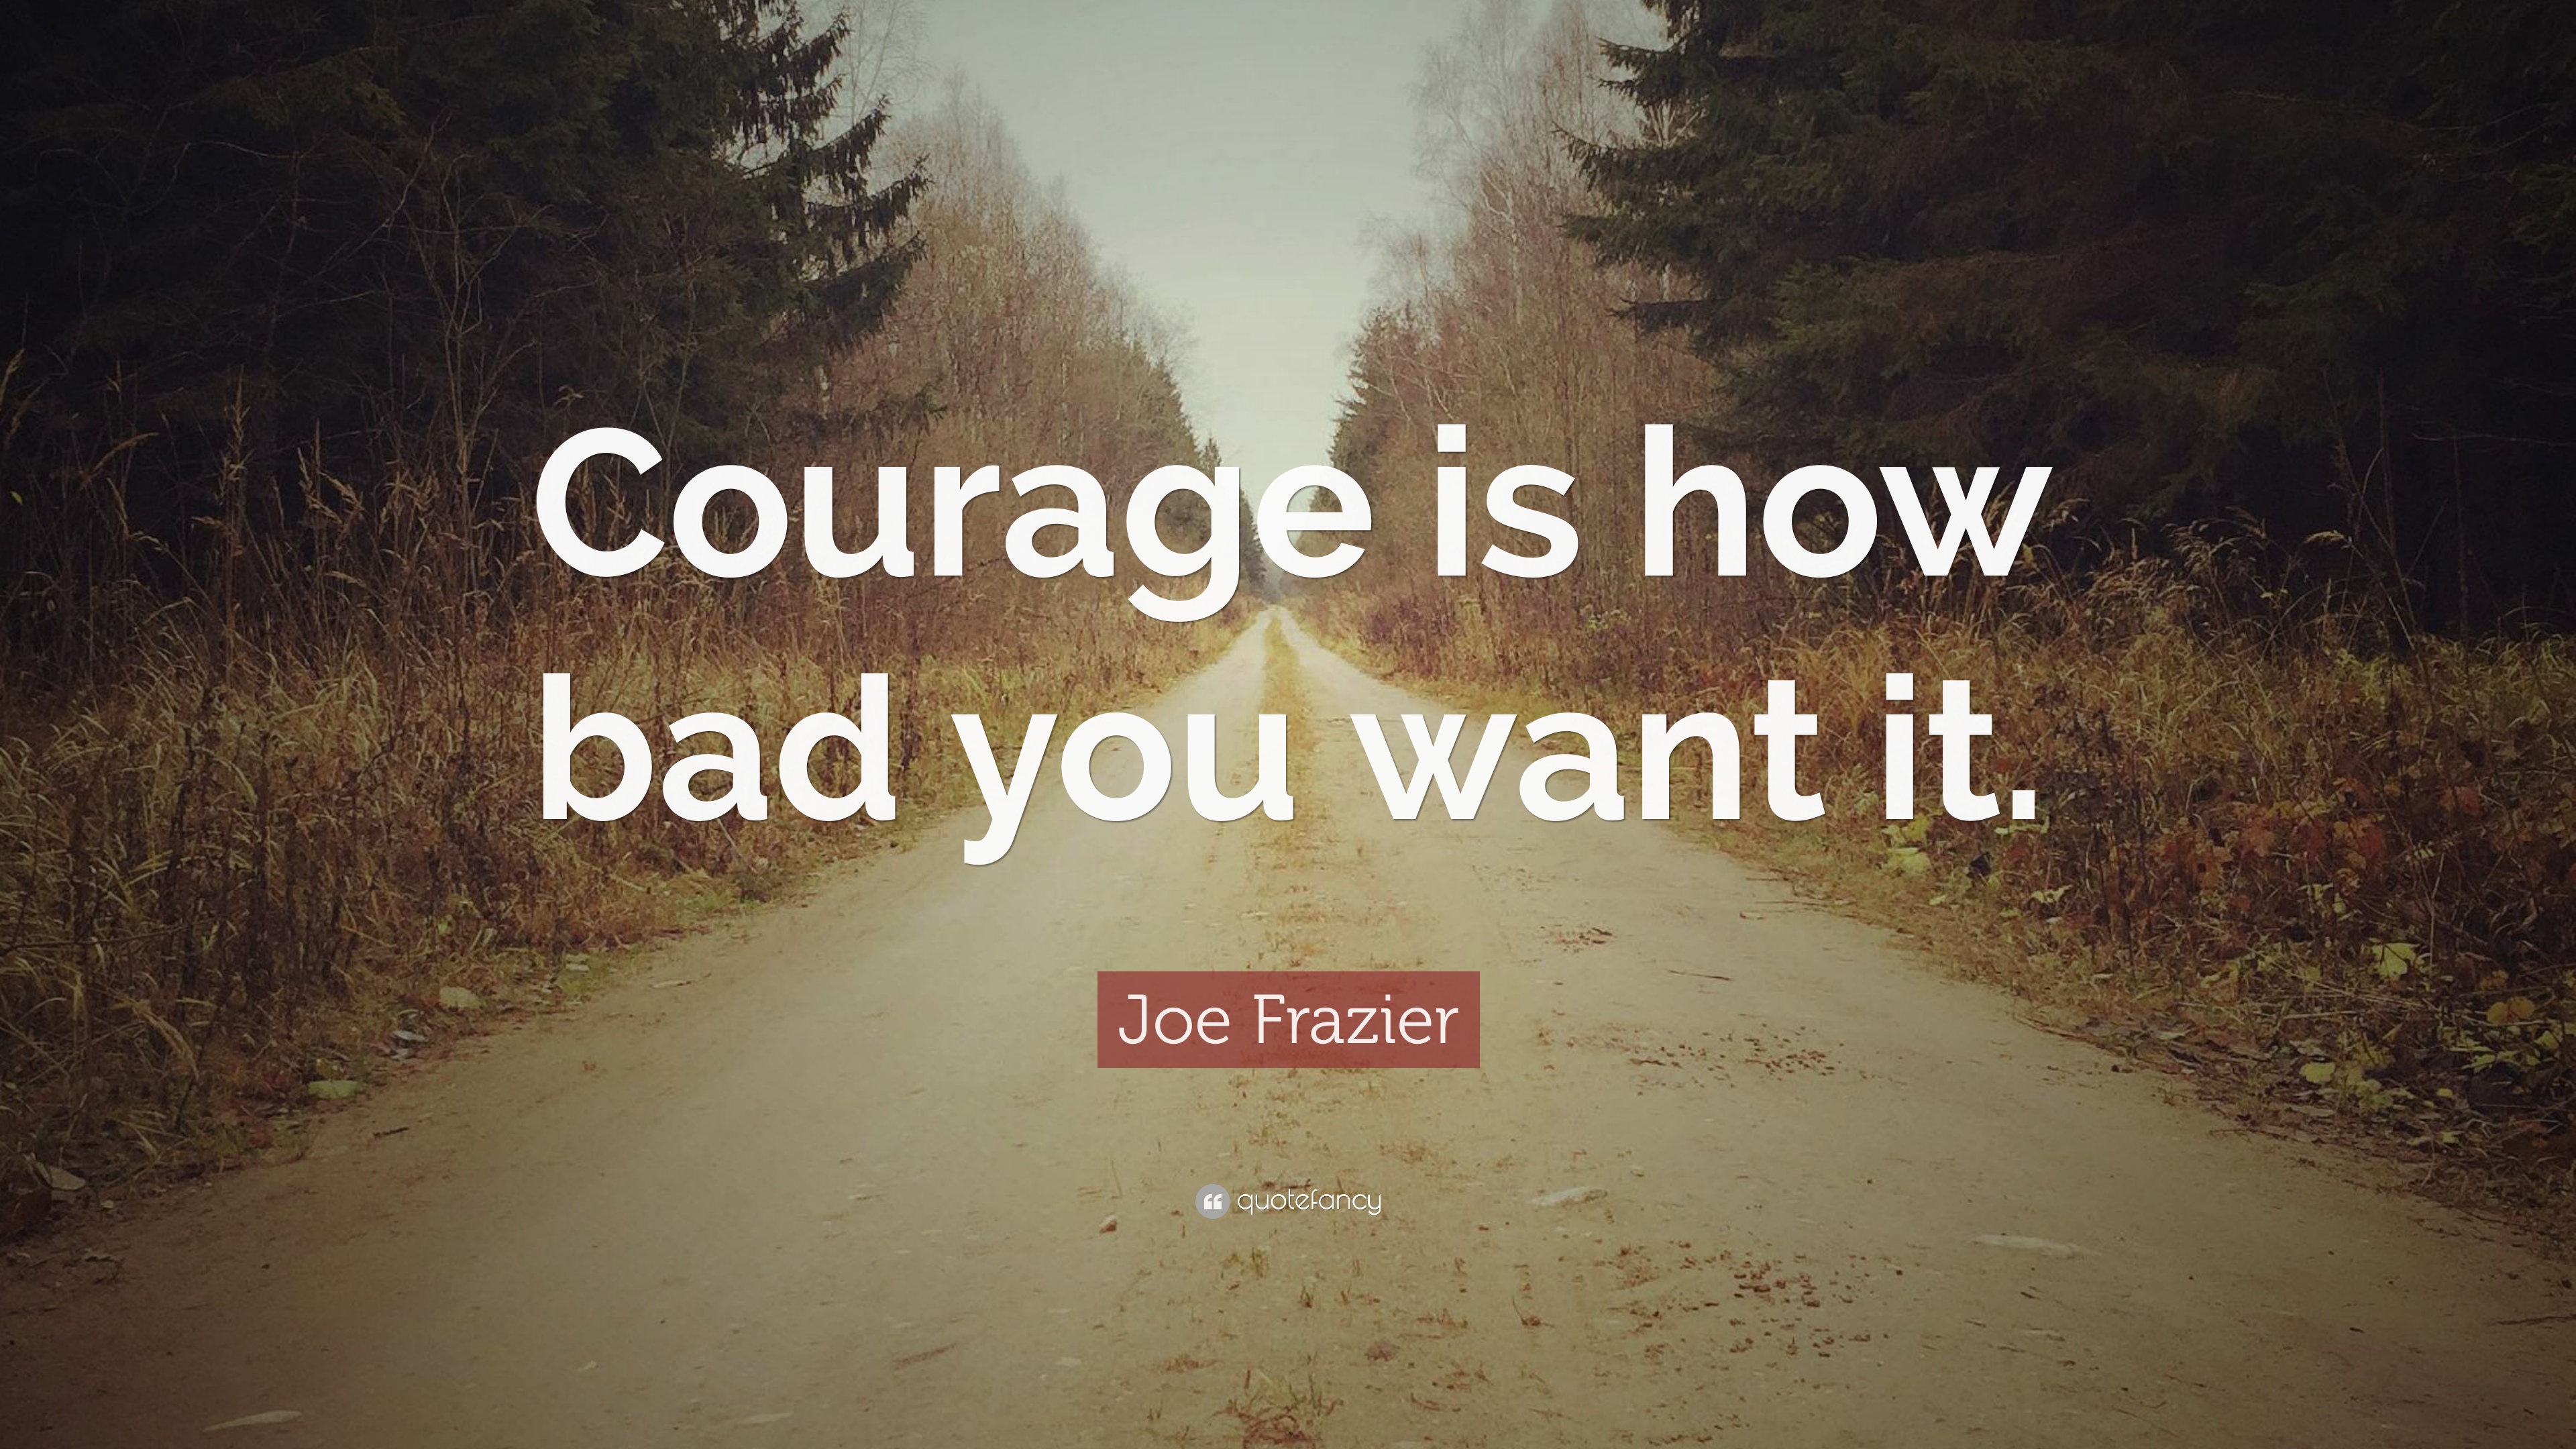 Joe Frazier Quote: “Courage is how bad you want it.” 7 wallpaper